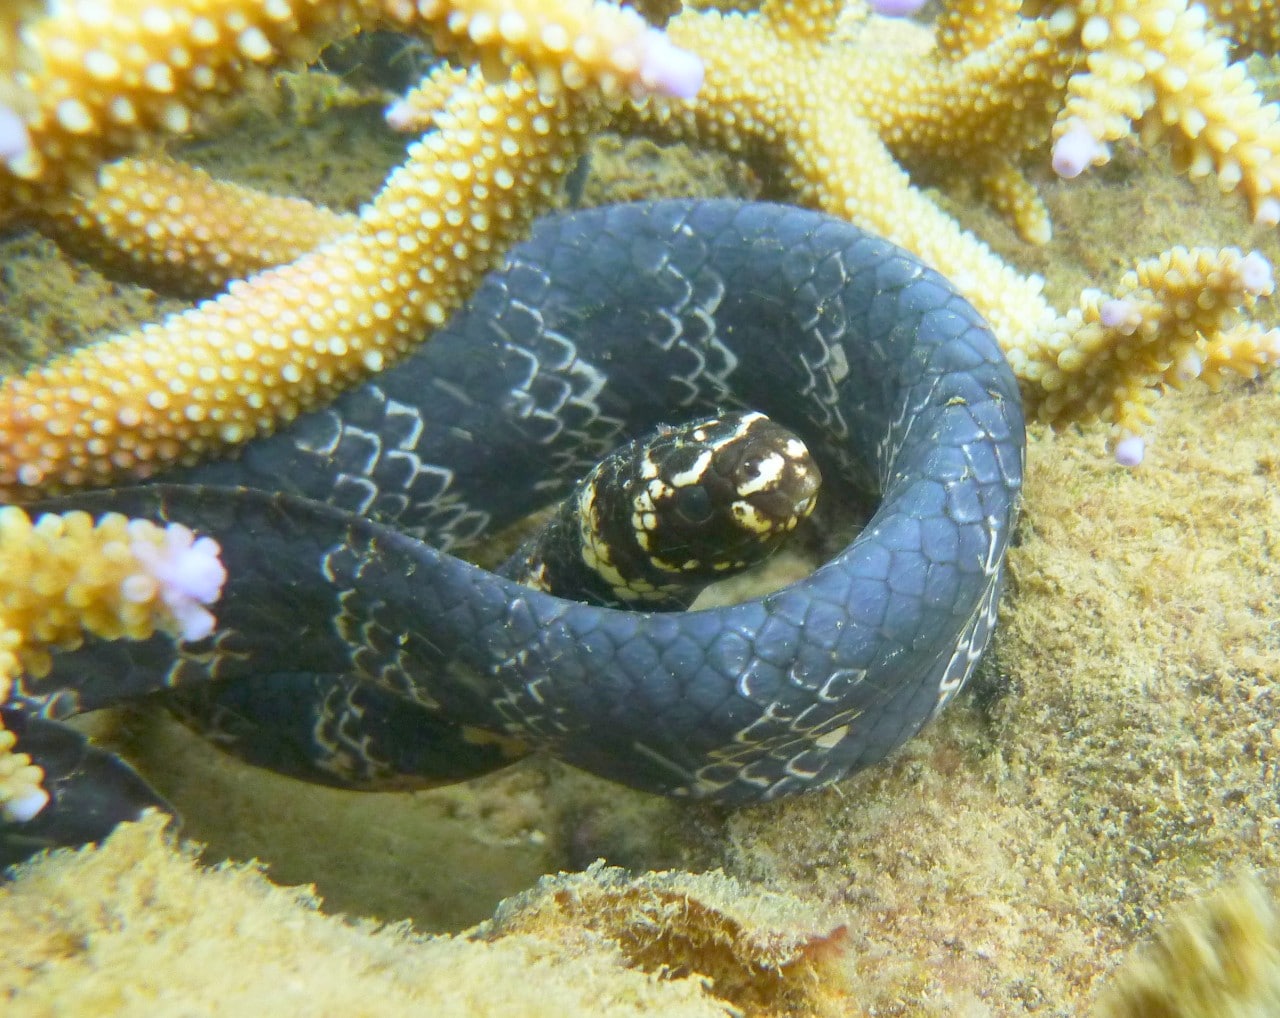 Turtle-headed seasnake photos by Claire Goiran. Video by Terri Shine.